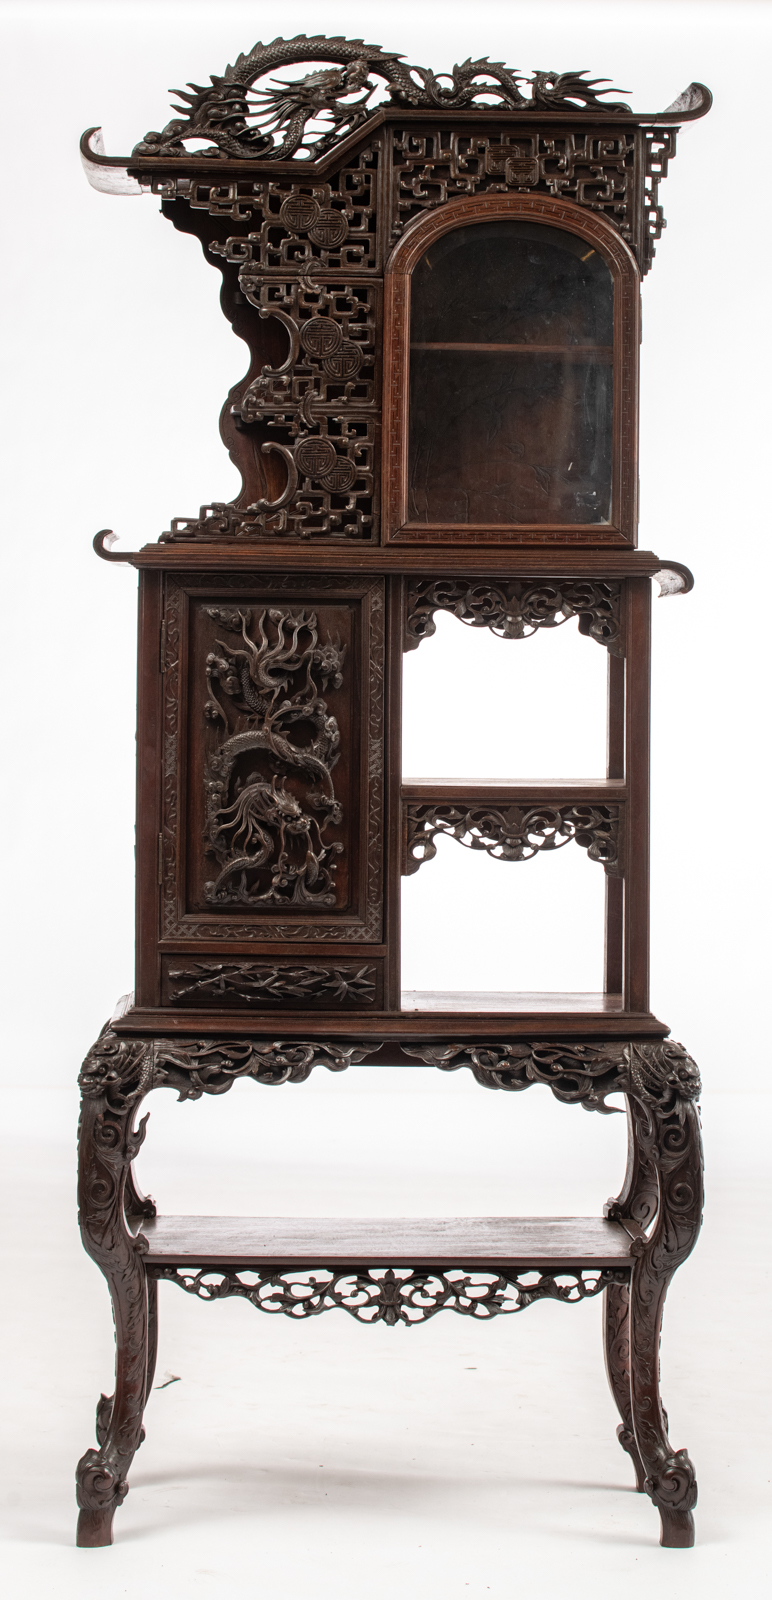 A Chinese exotic hardwood display cabinet, finely sculpted with floral decoration and dragons, H 173 - Image 2 of 6